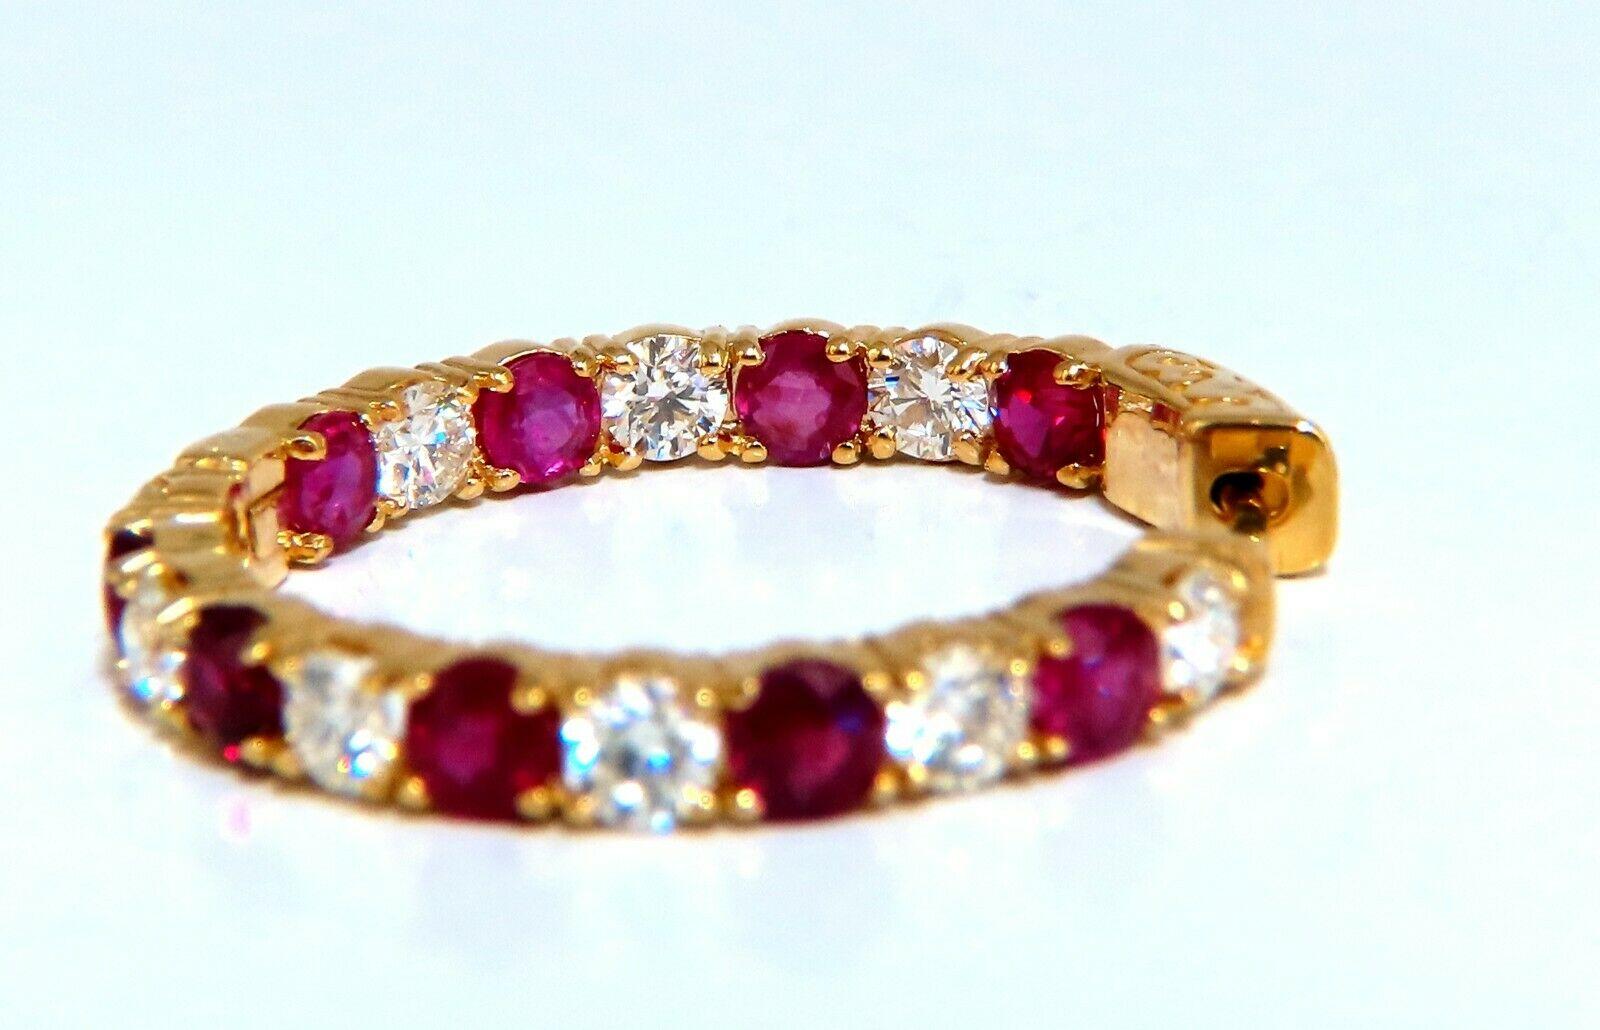 Women's or Men's 7.19ct Natural Ruby Diamonds Hoop Earrings 14kt Yellow Gold Inside Out For Sale